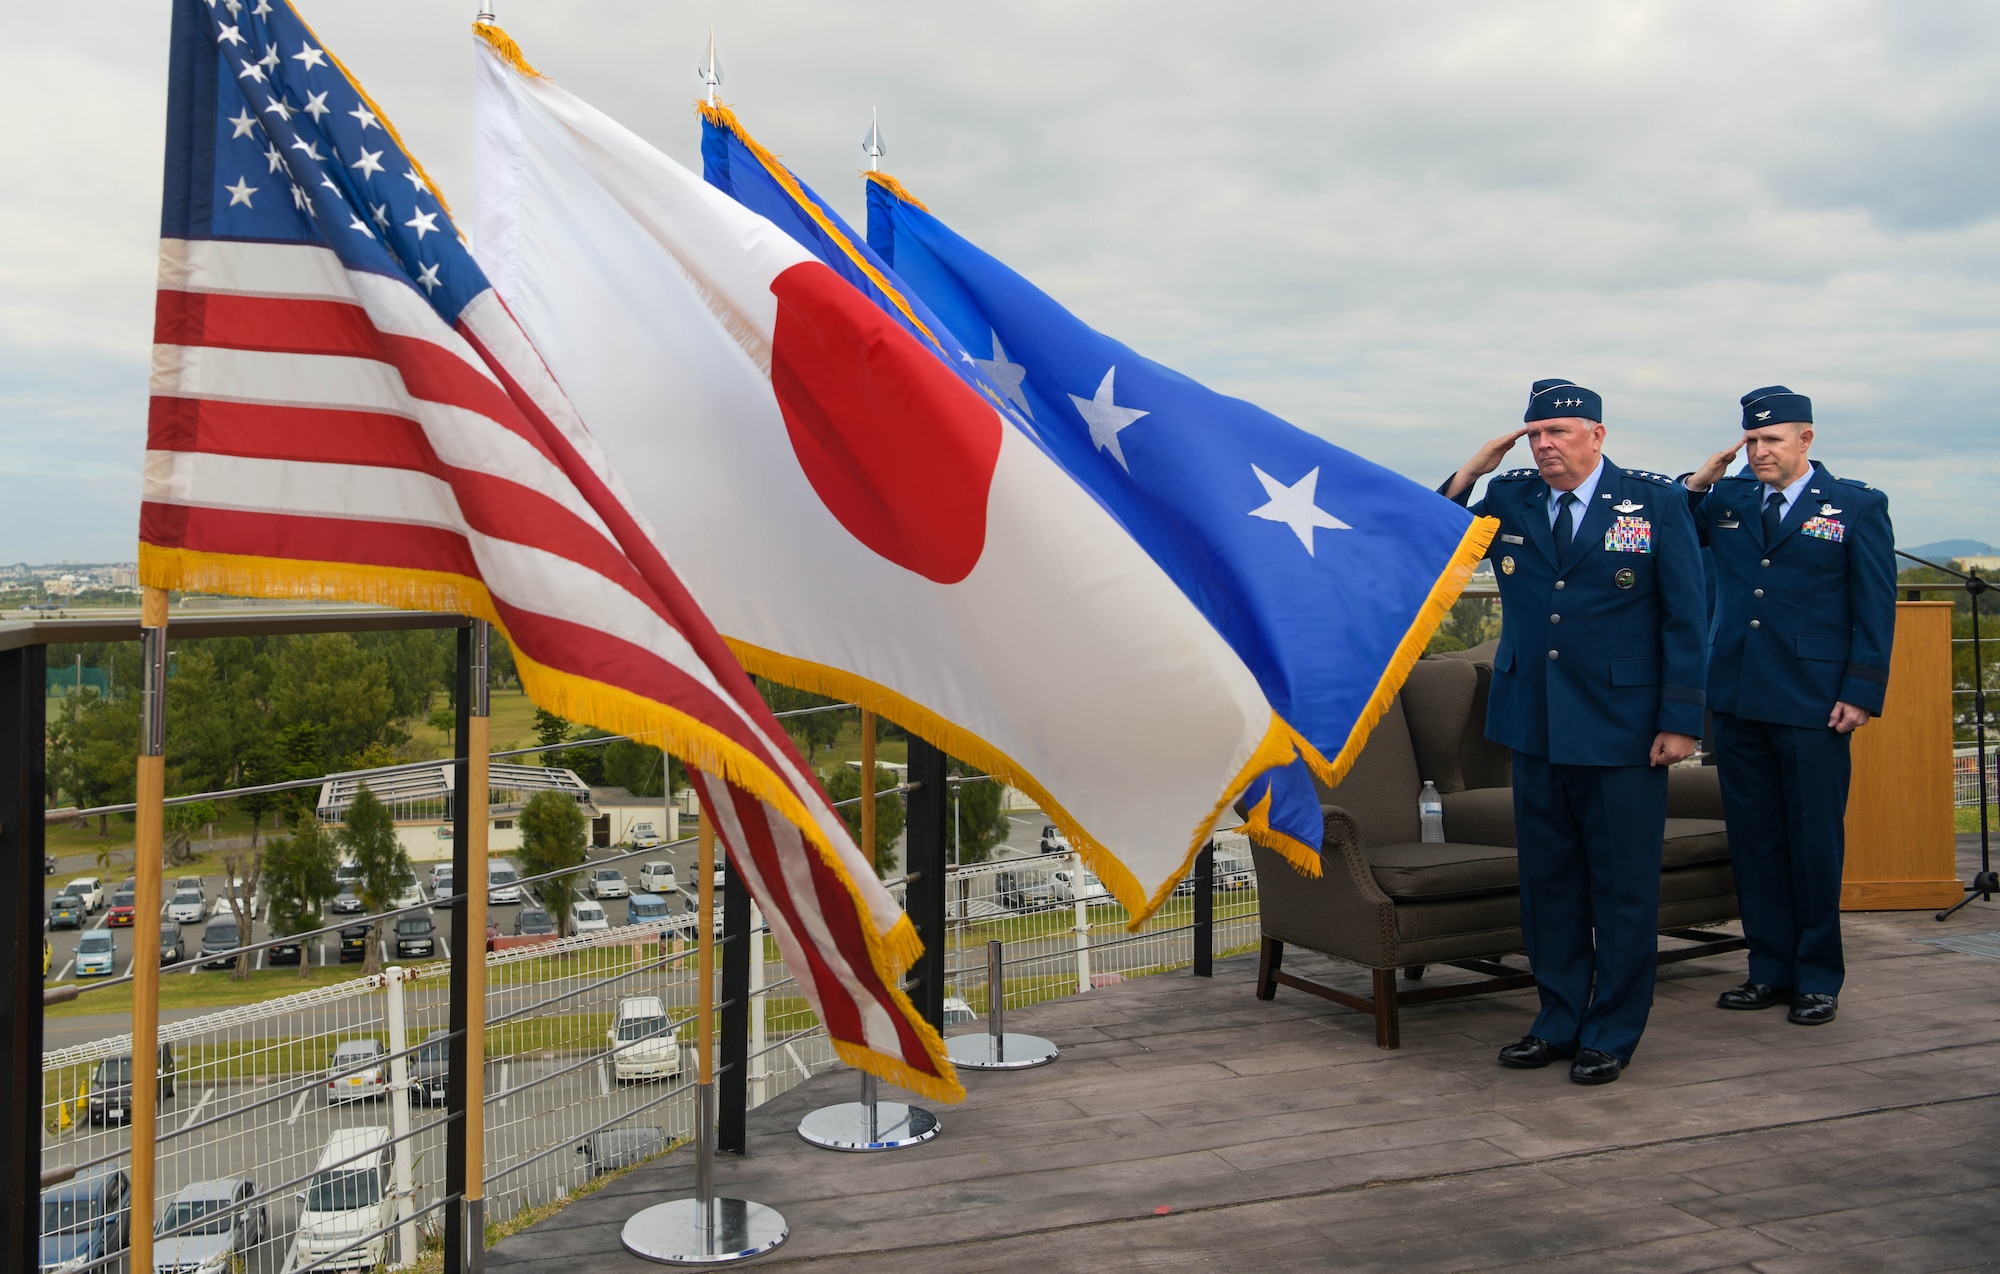 U.S. Air Force Lt. Gen. Ricky Rupp, left, U.S. Forces Japan and Fifth Air Force commander, and U.S. Air Force Brig. Gen. Nicholas Evans, right, 18th Wing commander, salute the U.S. flag during the singing of the U.S. national anthem.